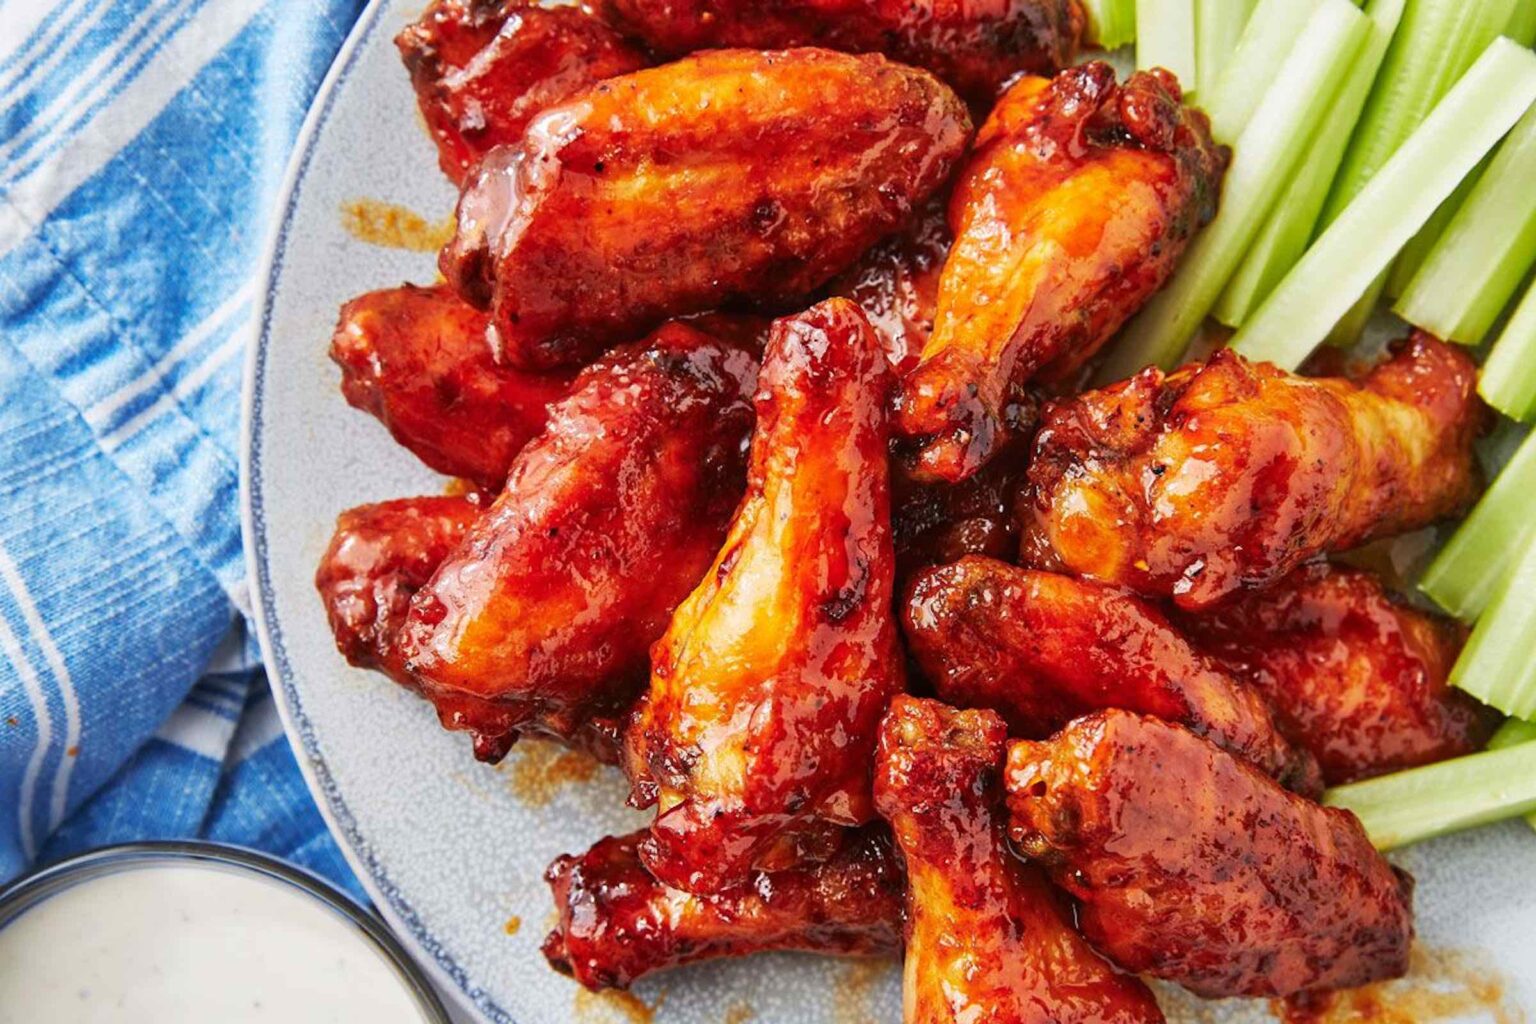 It’s National Chicken Wing Day and you bak-bak-bet we’re happy about it! Dive into these delicious air fryer chicken wing recipes to help you celebrate!